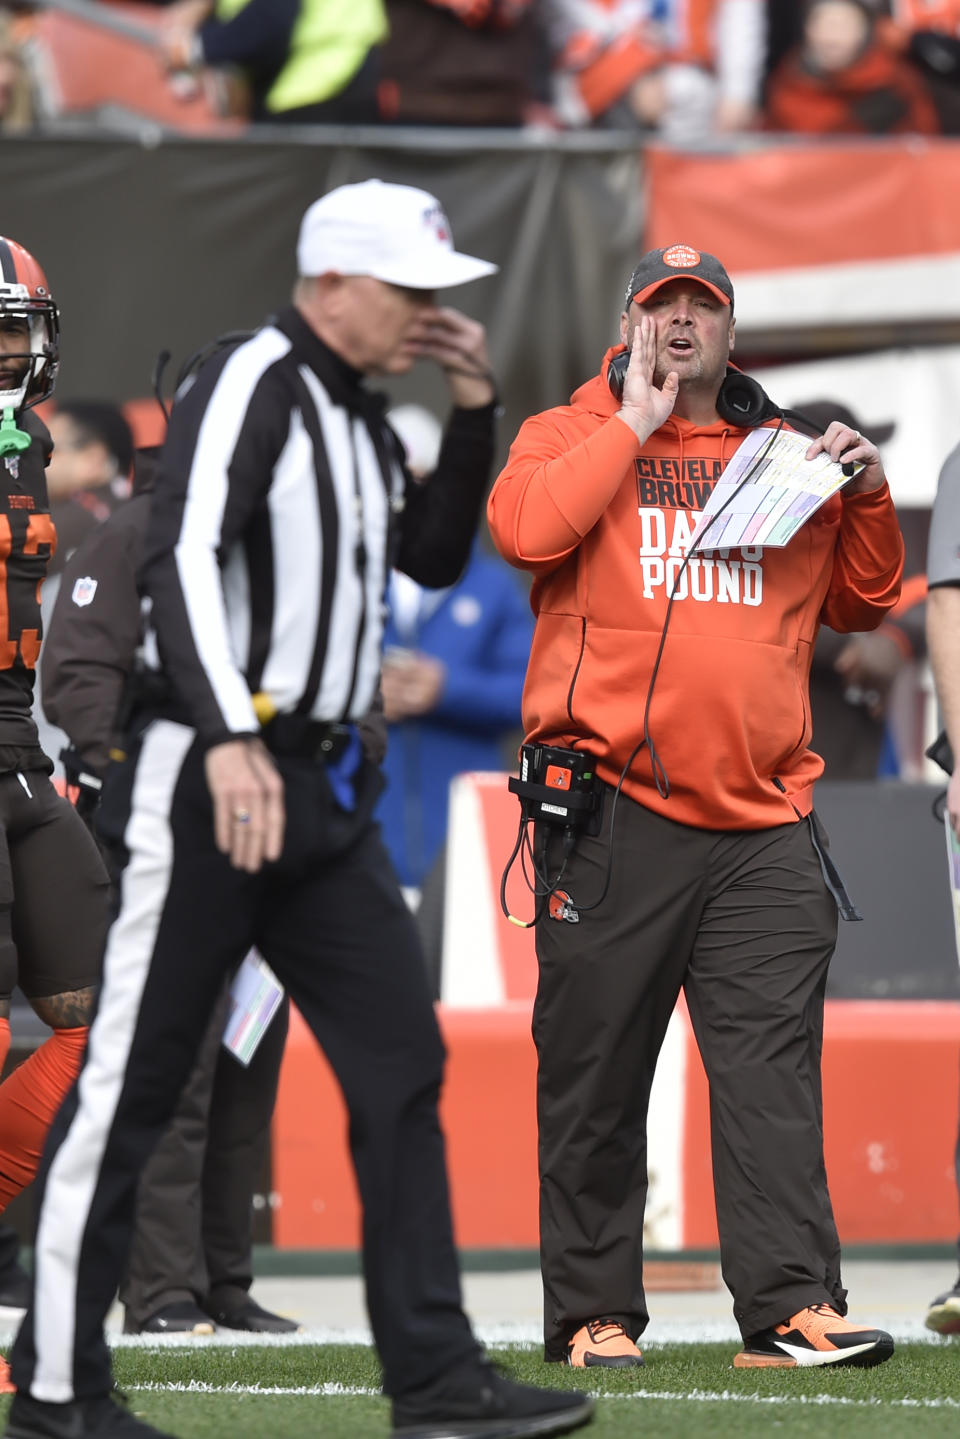 Cleveland Browns head coach Freddie Kitchens yells at an official during the first half of an NFL football game against the Cincinnati Bengals, Sunday, Dec. 8, 2019, in Cleveland. (AP Photo/David Richard)